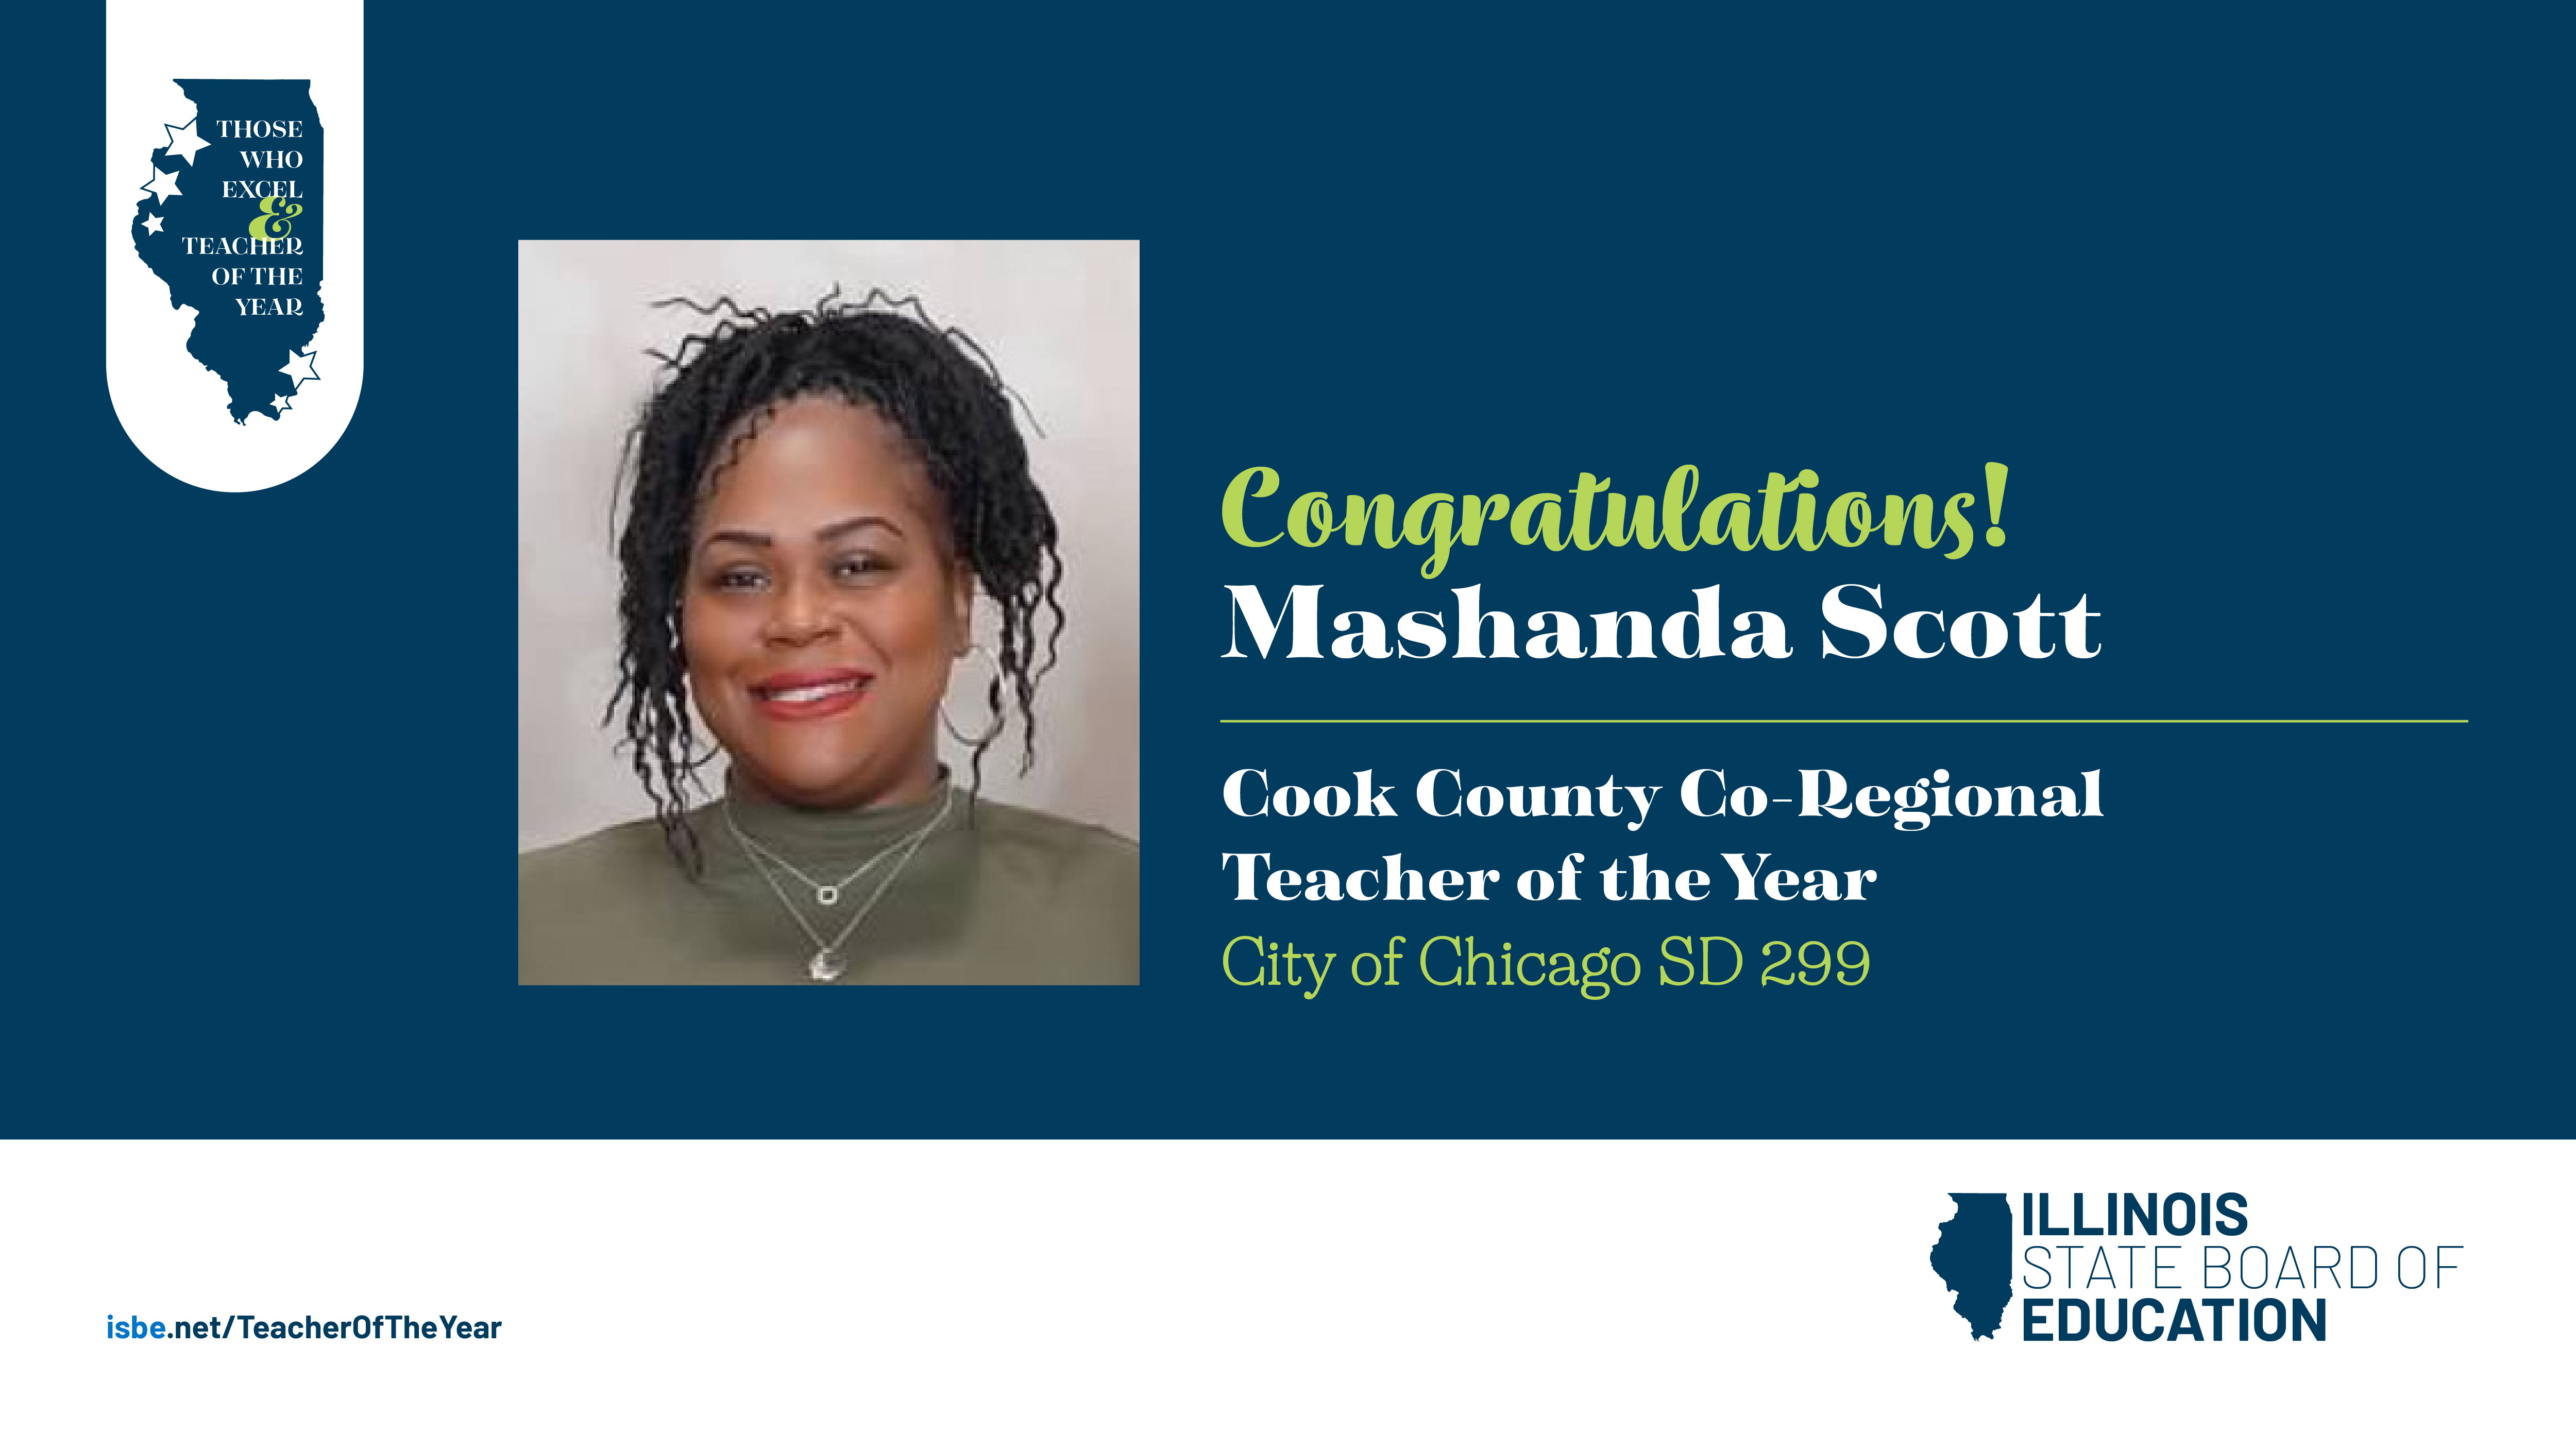 Congratulations to Mashanda Scott, Cook County Co-Regional Teacher of the Year from City of Chicago SD 299